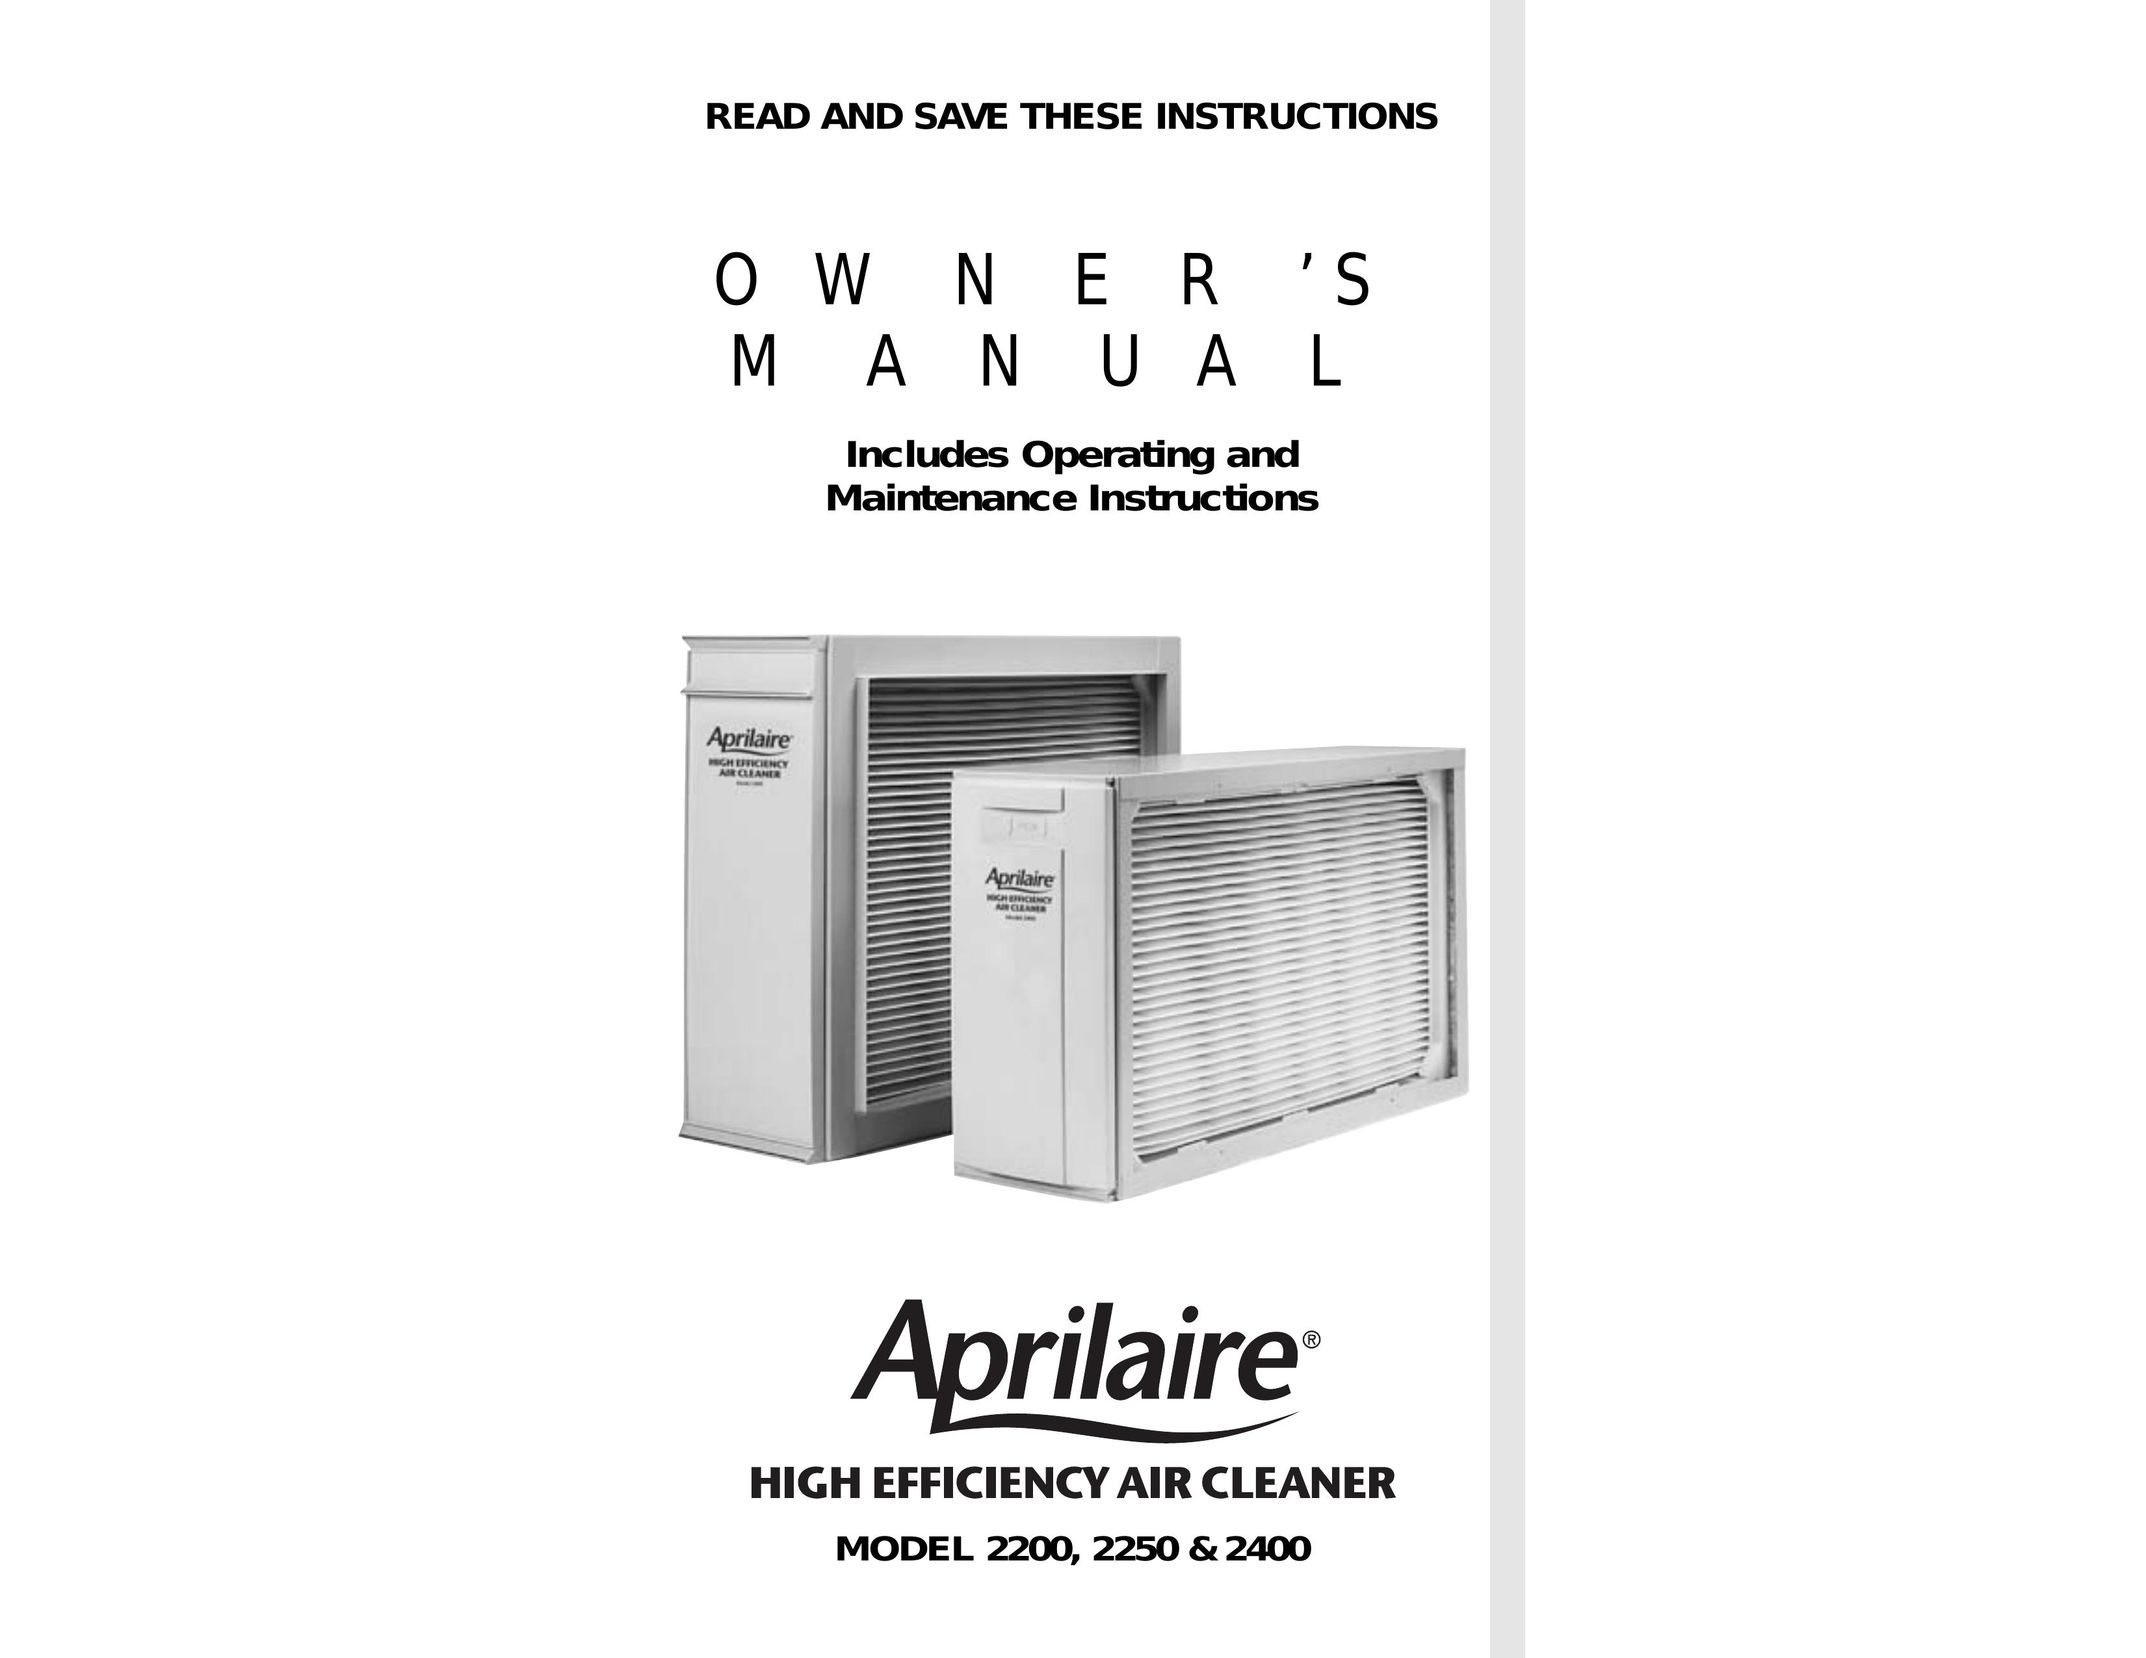 Aprilaire 2400 Air Cleaner User Manual (Page 1)